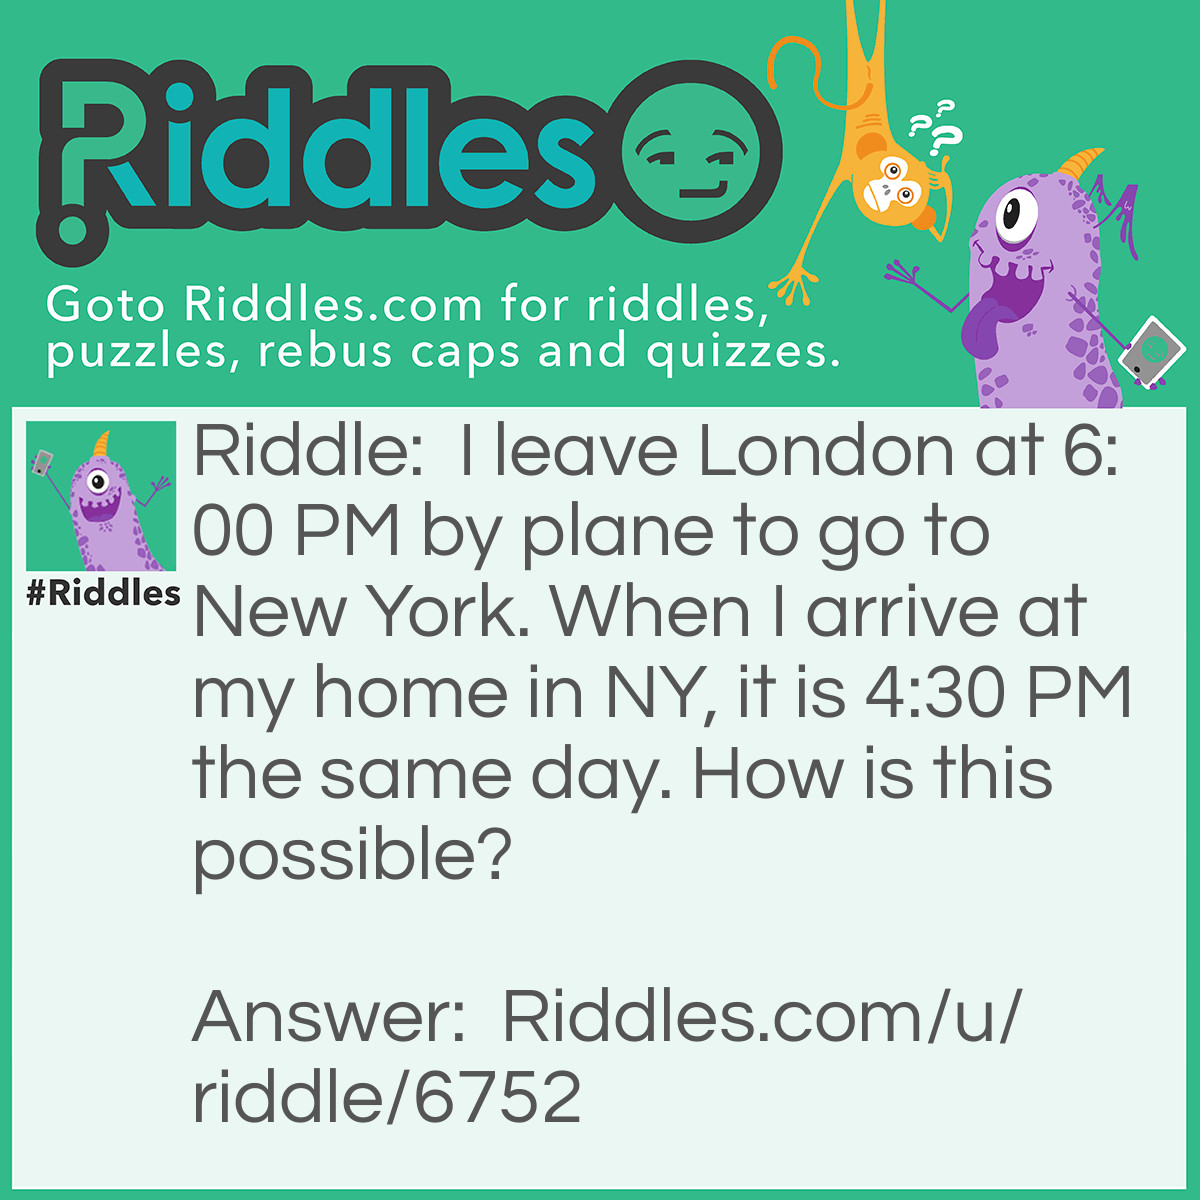 Riddle: I leave London at 6:00 PM by plane to go to New York. When I arrive at my home in NY, it is 4:30 PM the same day. How is this possible? Answer: The time zone difference causes you to appear to arrive earlier than you left. Although this is not physically possible at this point (we need to travel faster than the speed of light to do so), it appears this way.